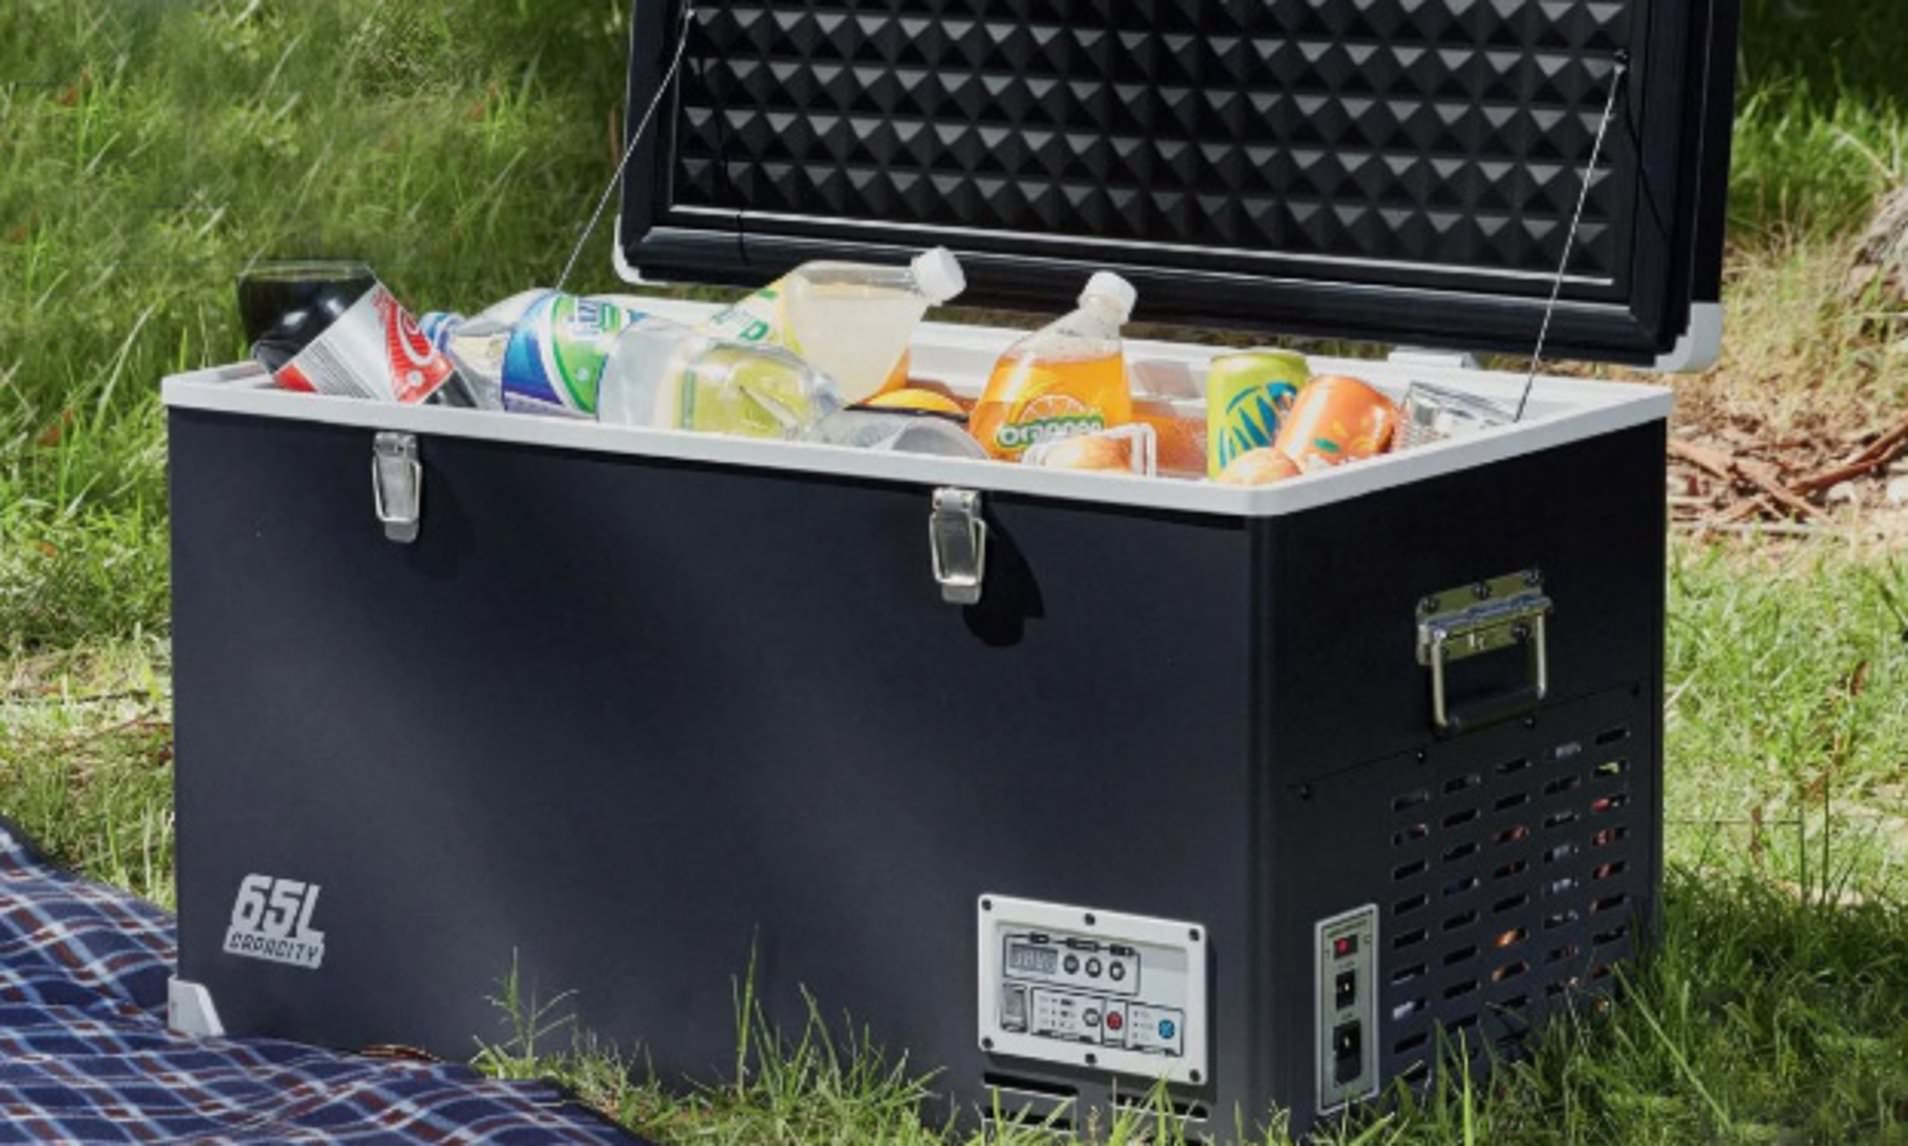 For those who enjoy camping or travelling in their truck or caravan, a portable camper fridge and freezer can be an excellent purchase that ensures cold drinks, well-preserved food, and frozen goodies. They can be a superior option to traditional coolers because they do not require you to refill their ice.